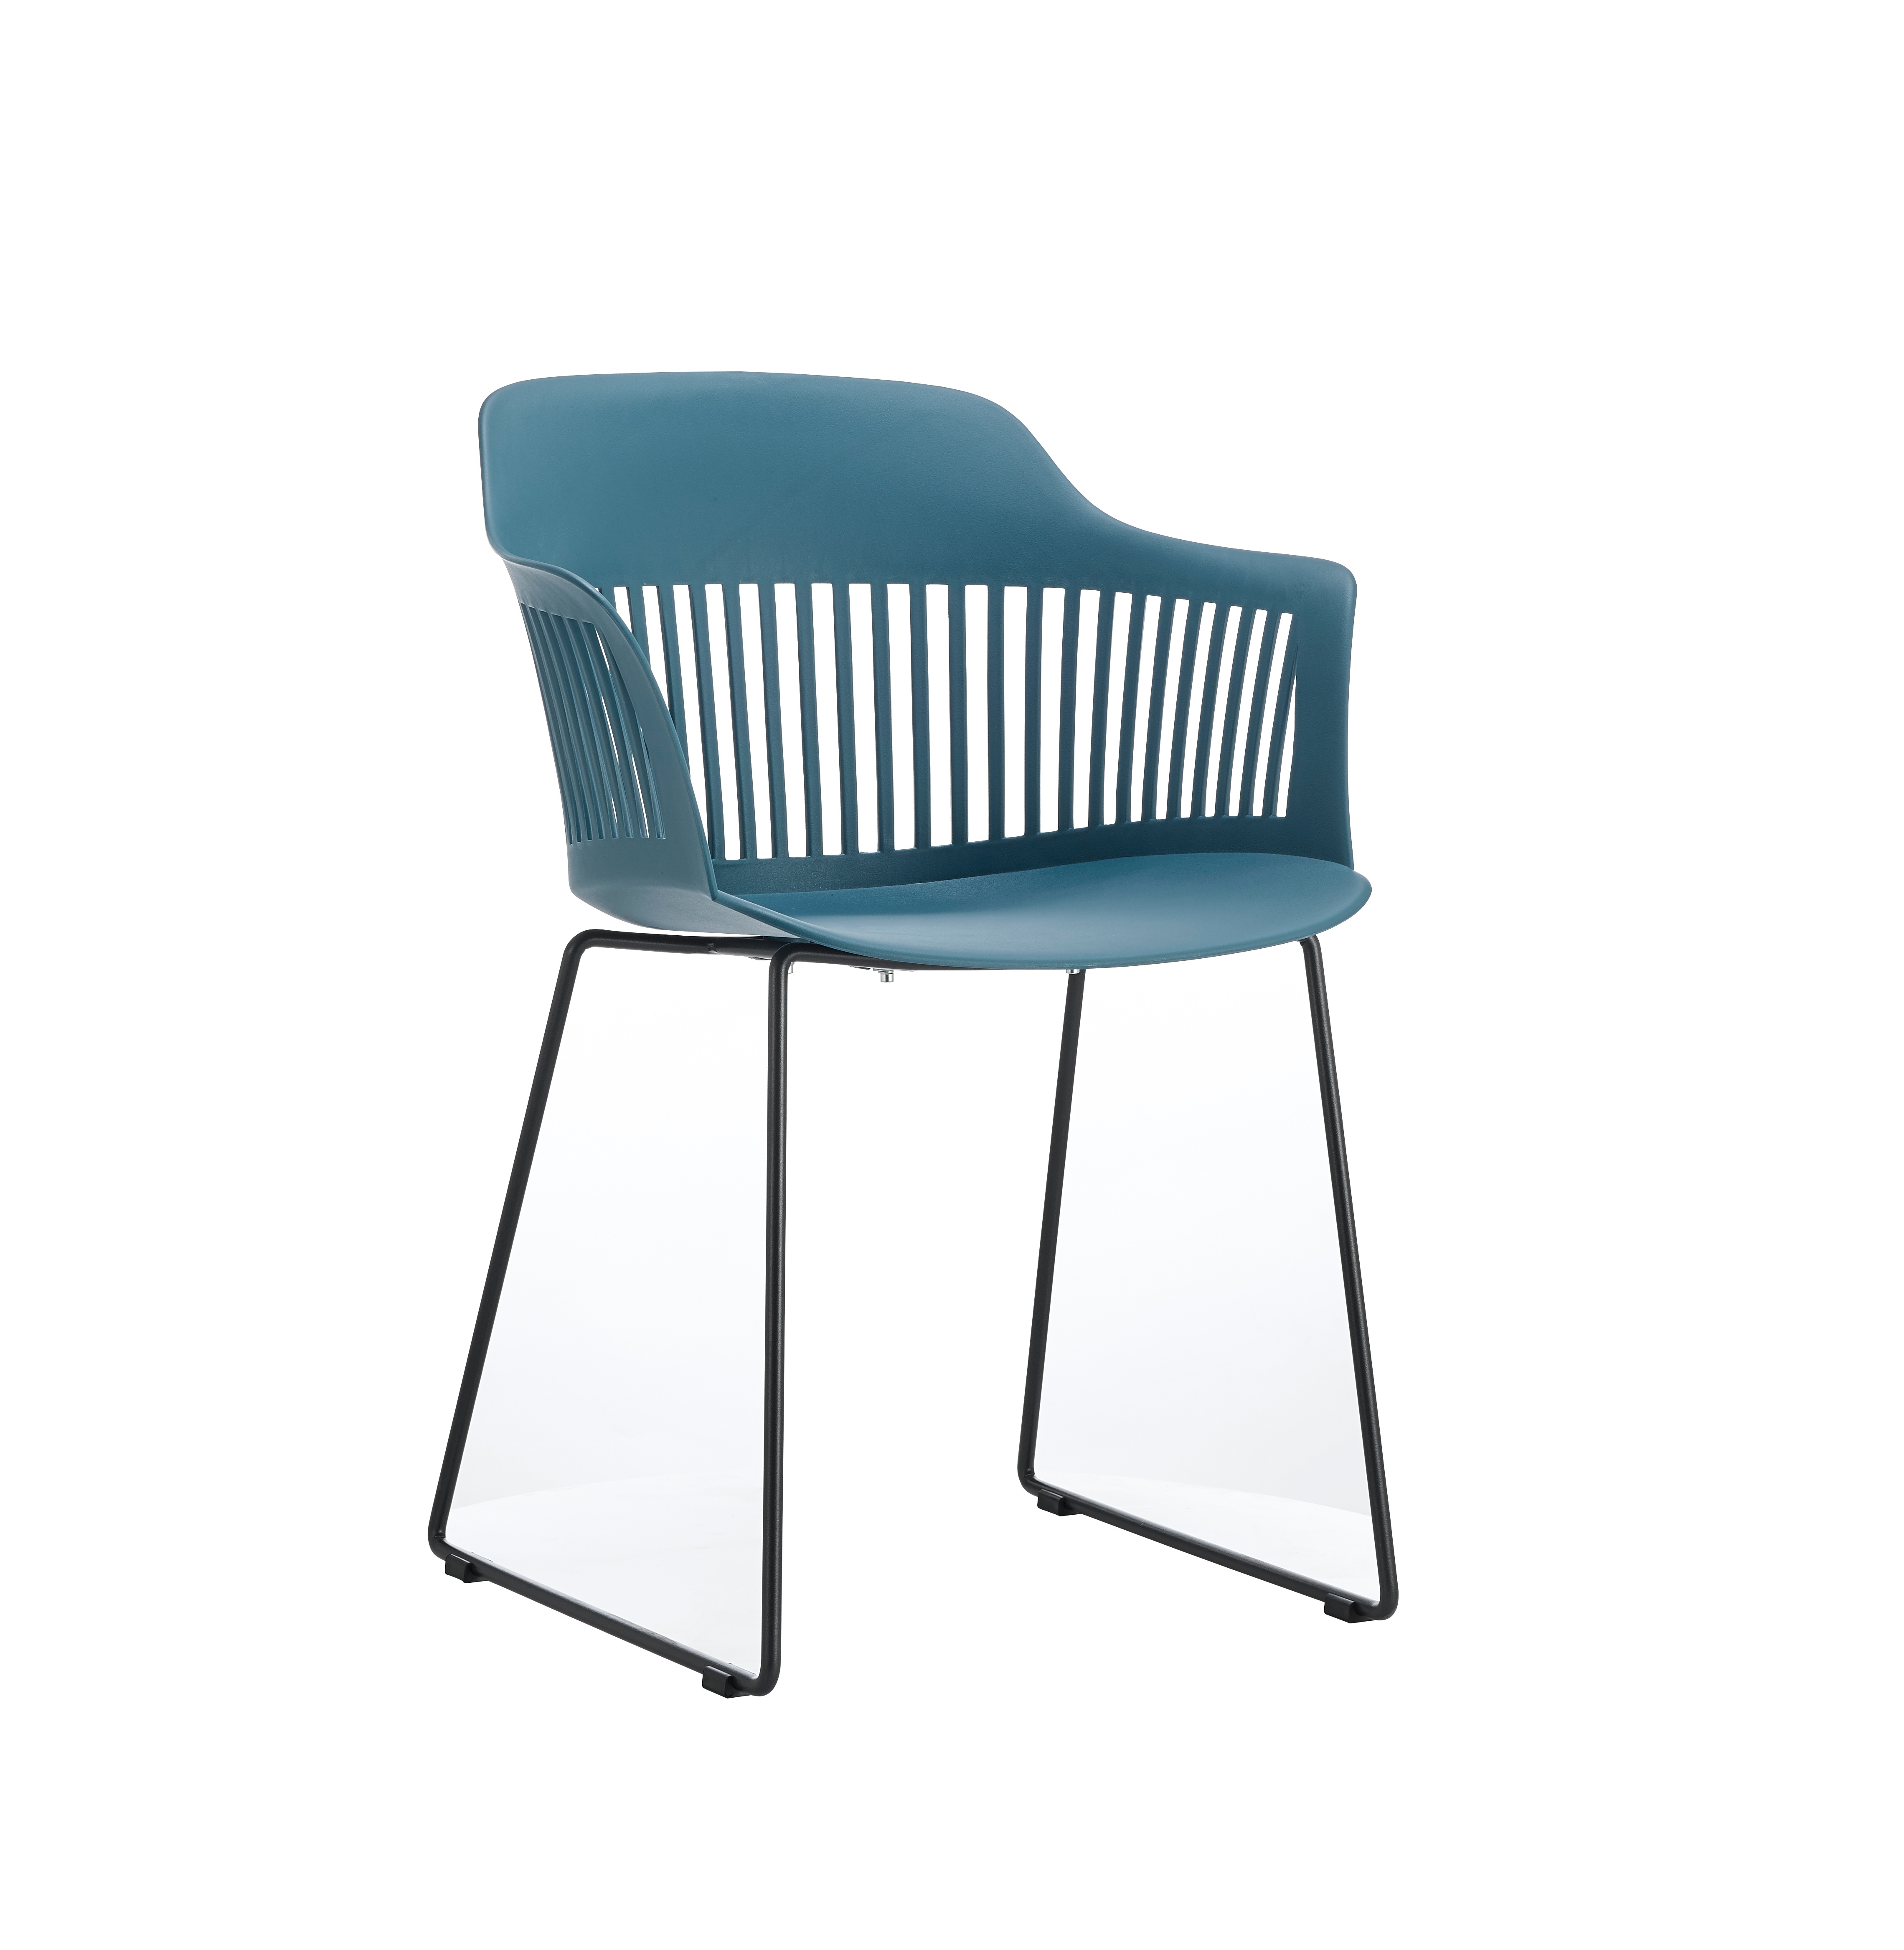 Hot Sale Cheap Price Colorful Modern Design plastic dining chair metal legs chair